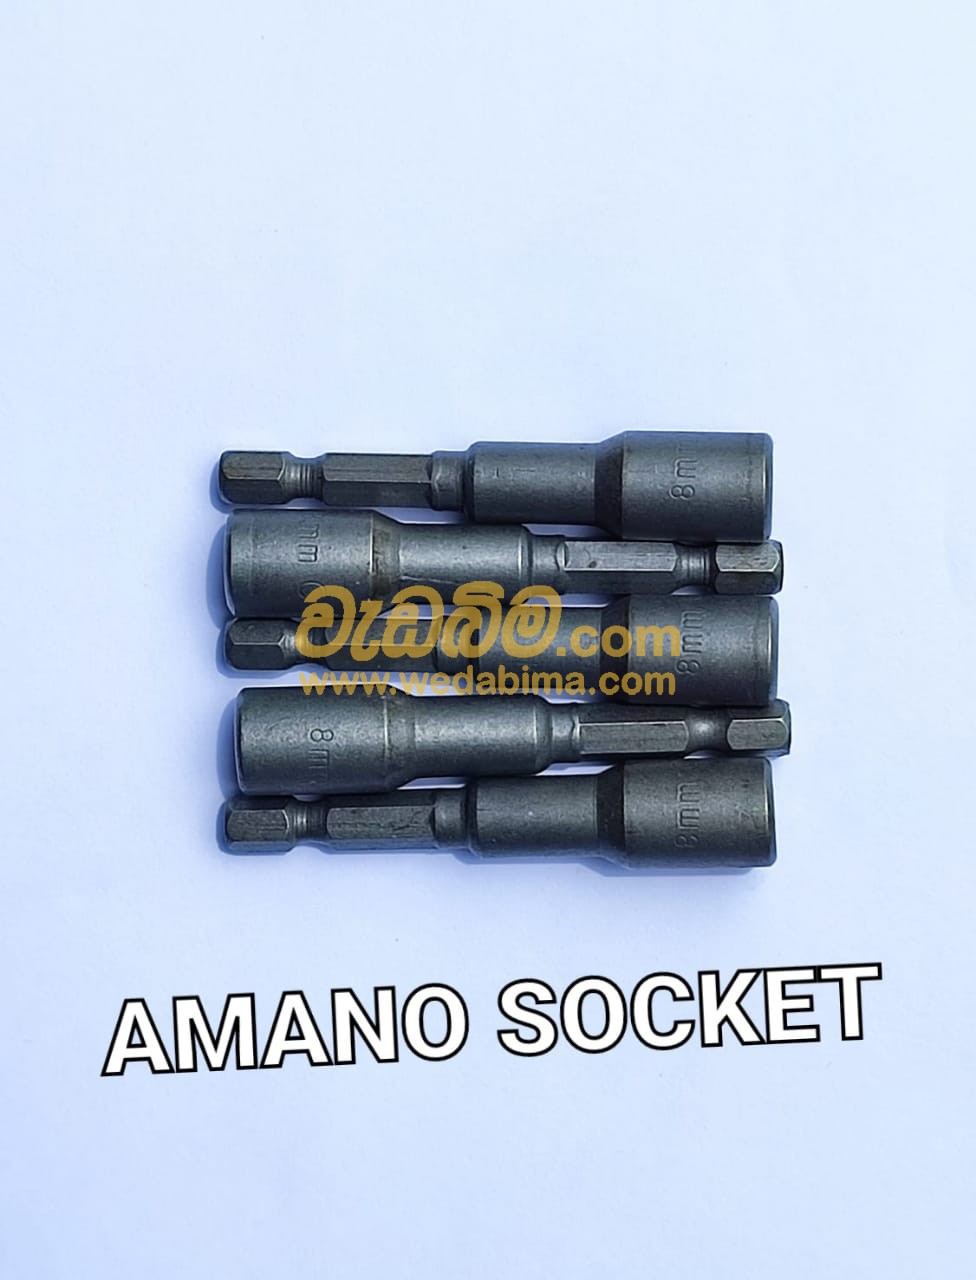 Cover image for amano socket price